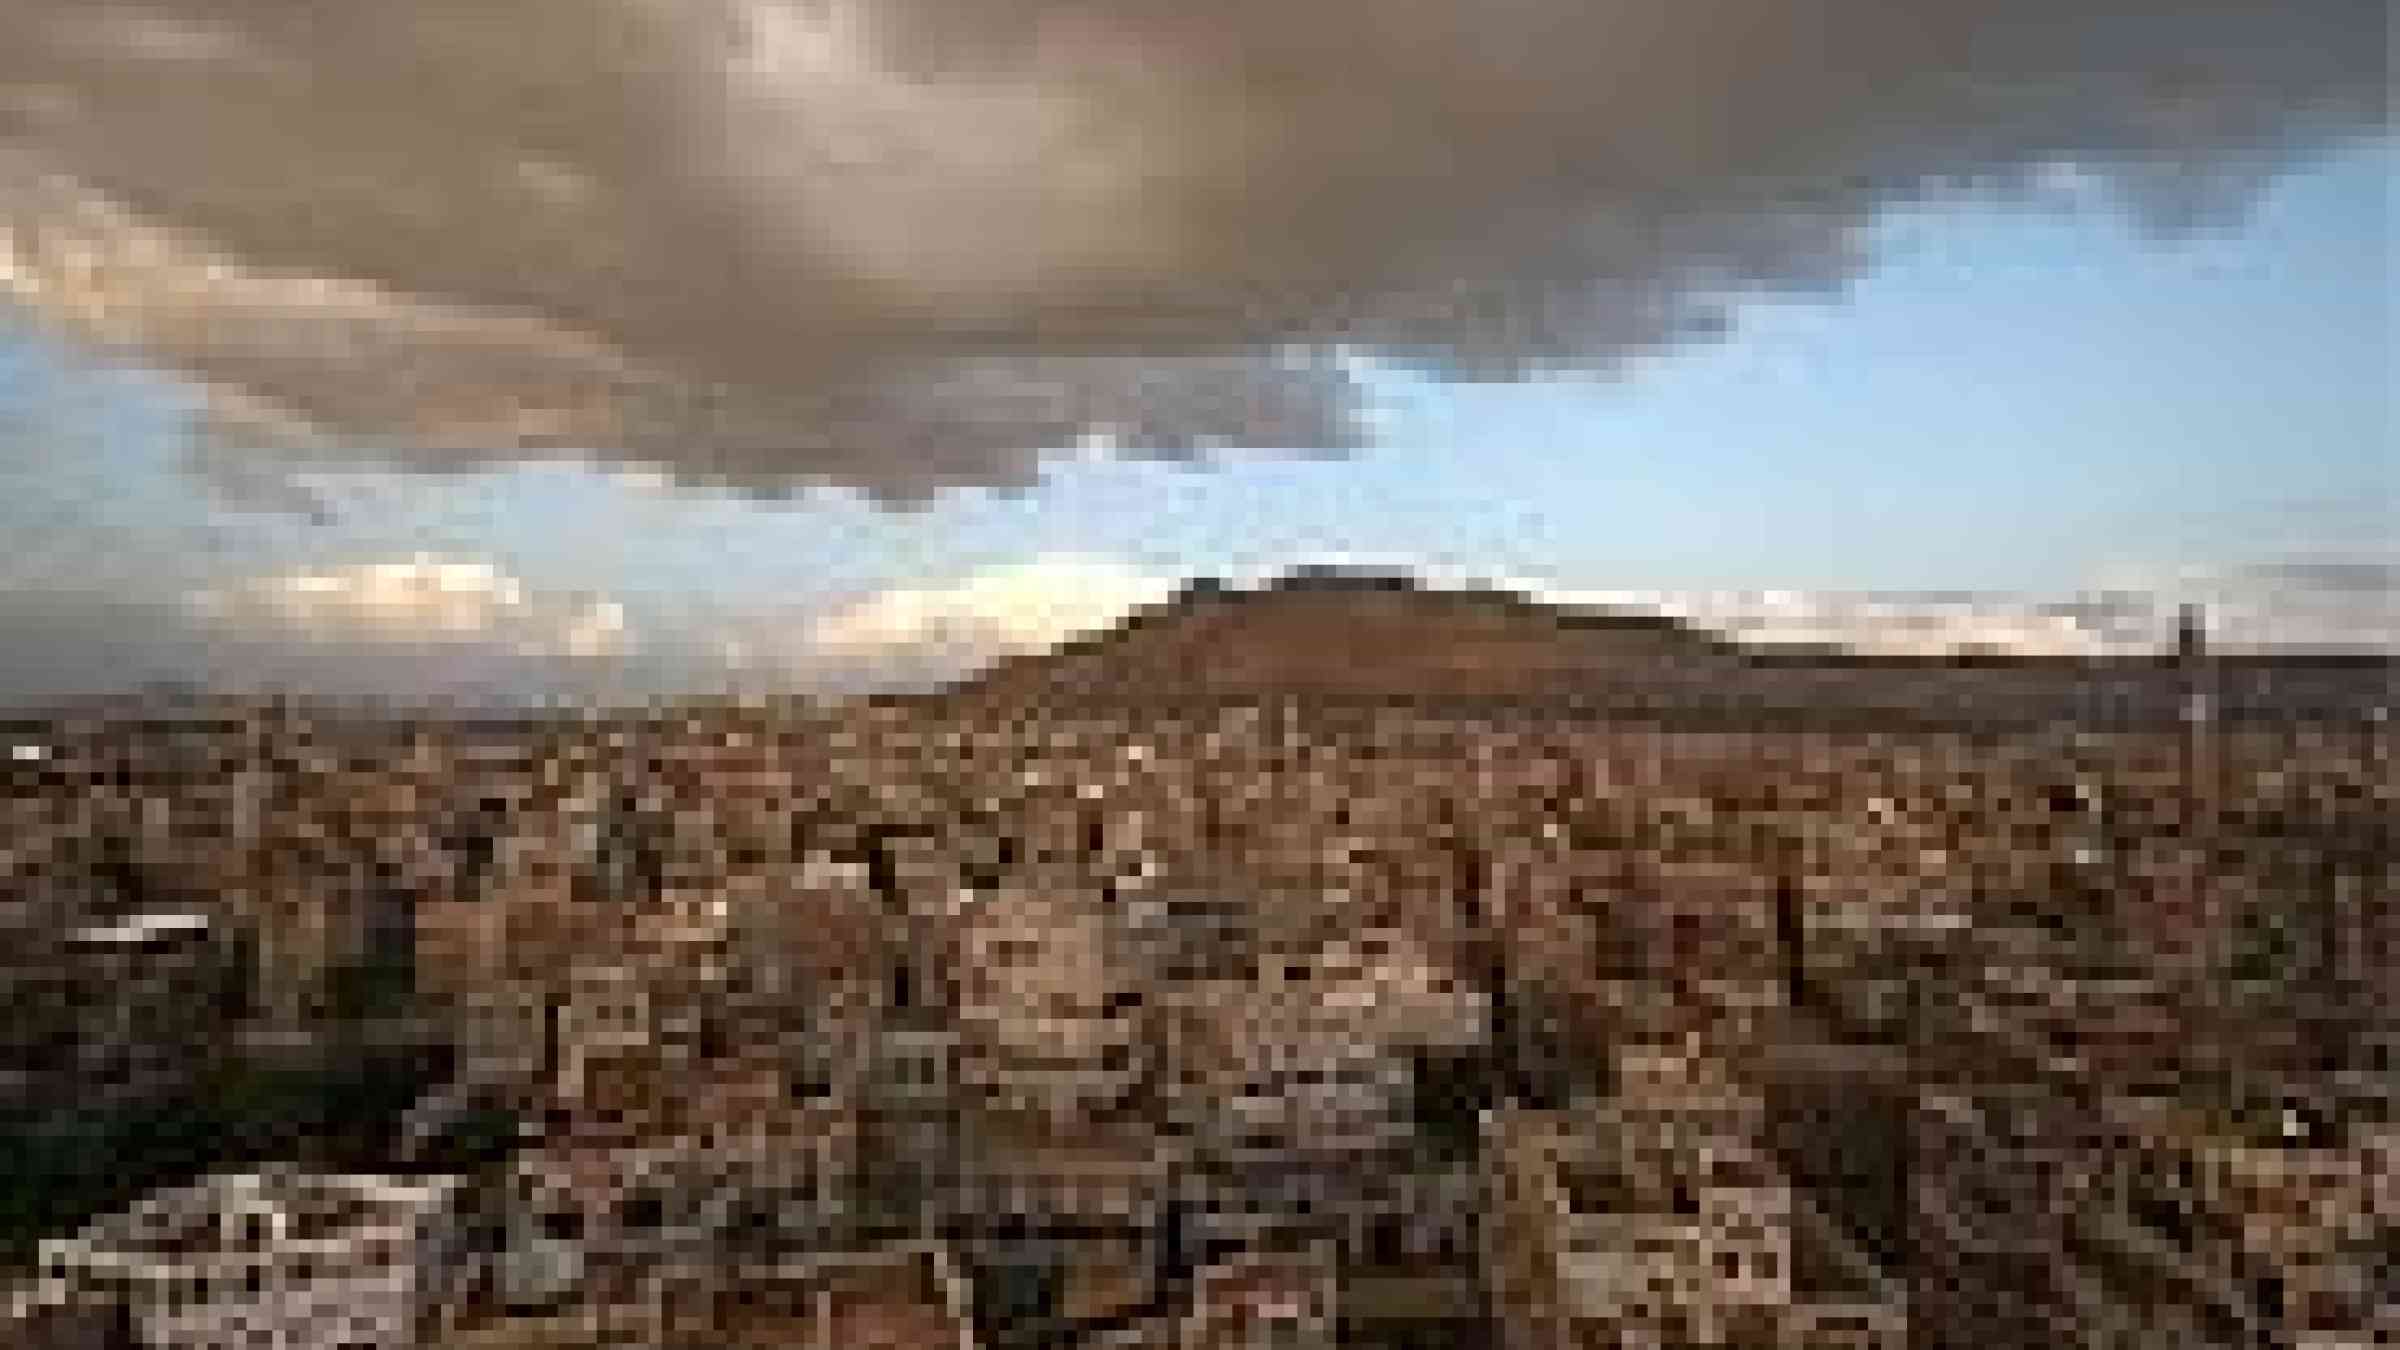 Photo of the Old Town Sanaa, Yemen by Flikr user, Richard Messenger, Creative Commons Attribution-Noncommercial 2.0 Generic